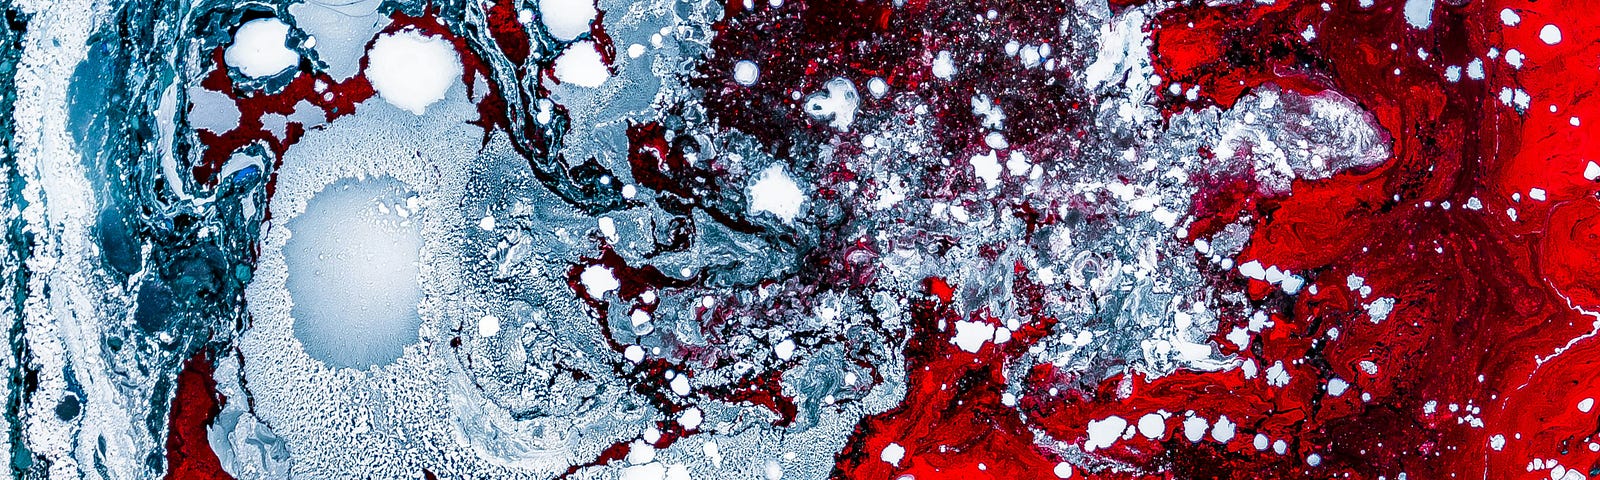 A fusion of milk, water paint, and oil reminiscent of blood and ice